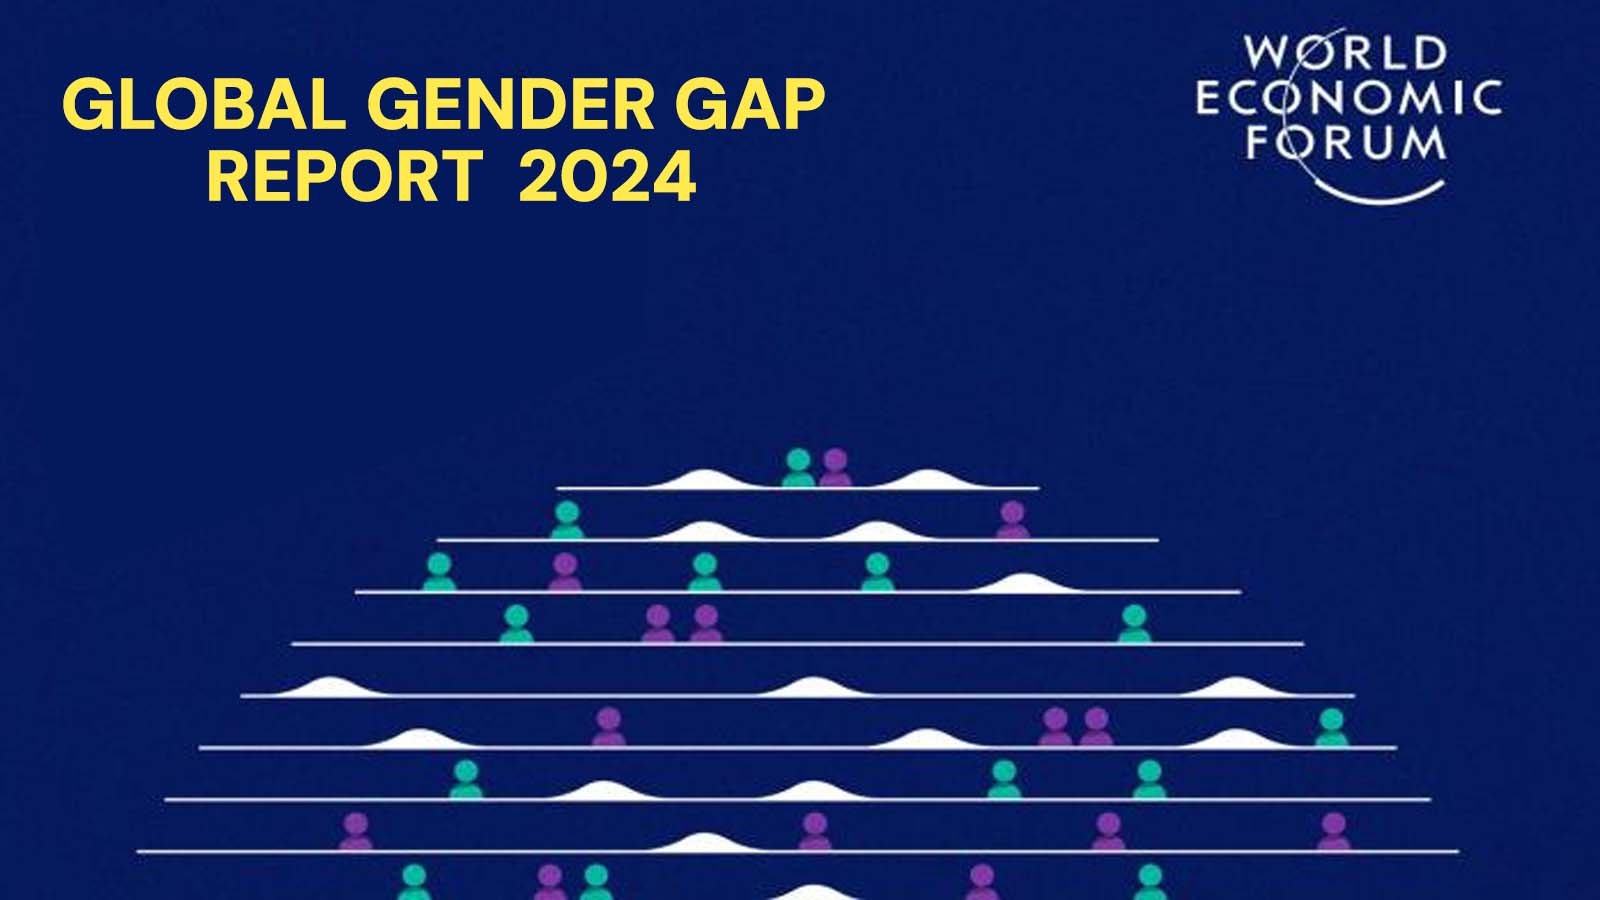 Global Gender Gap Report 2024: Key Findings and Analysis for India